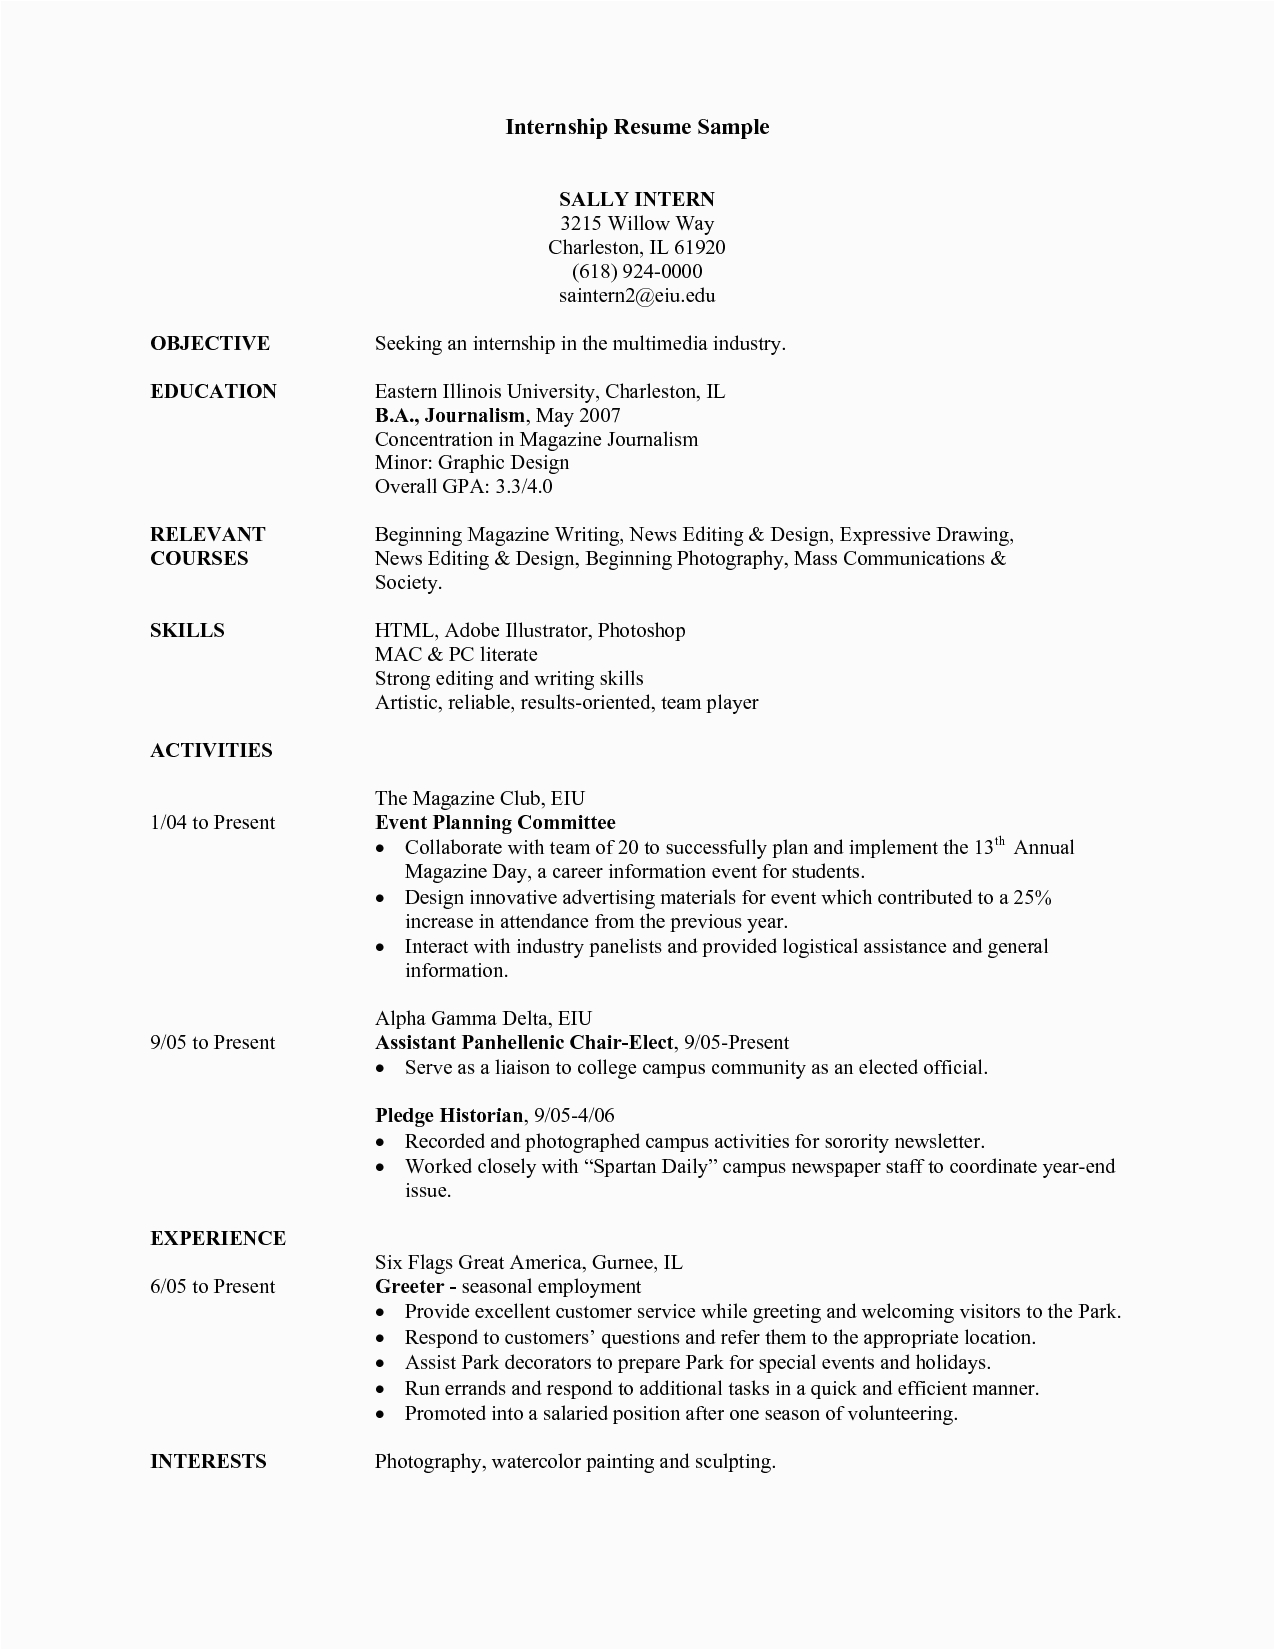 Sample Of College Student Resume for Internship Student Resume Example Sample College Internship Samples Students